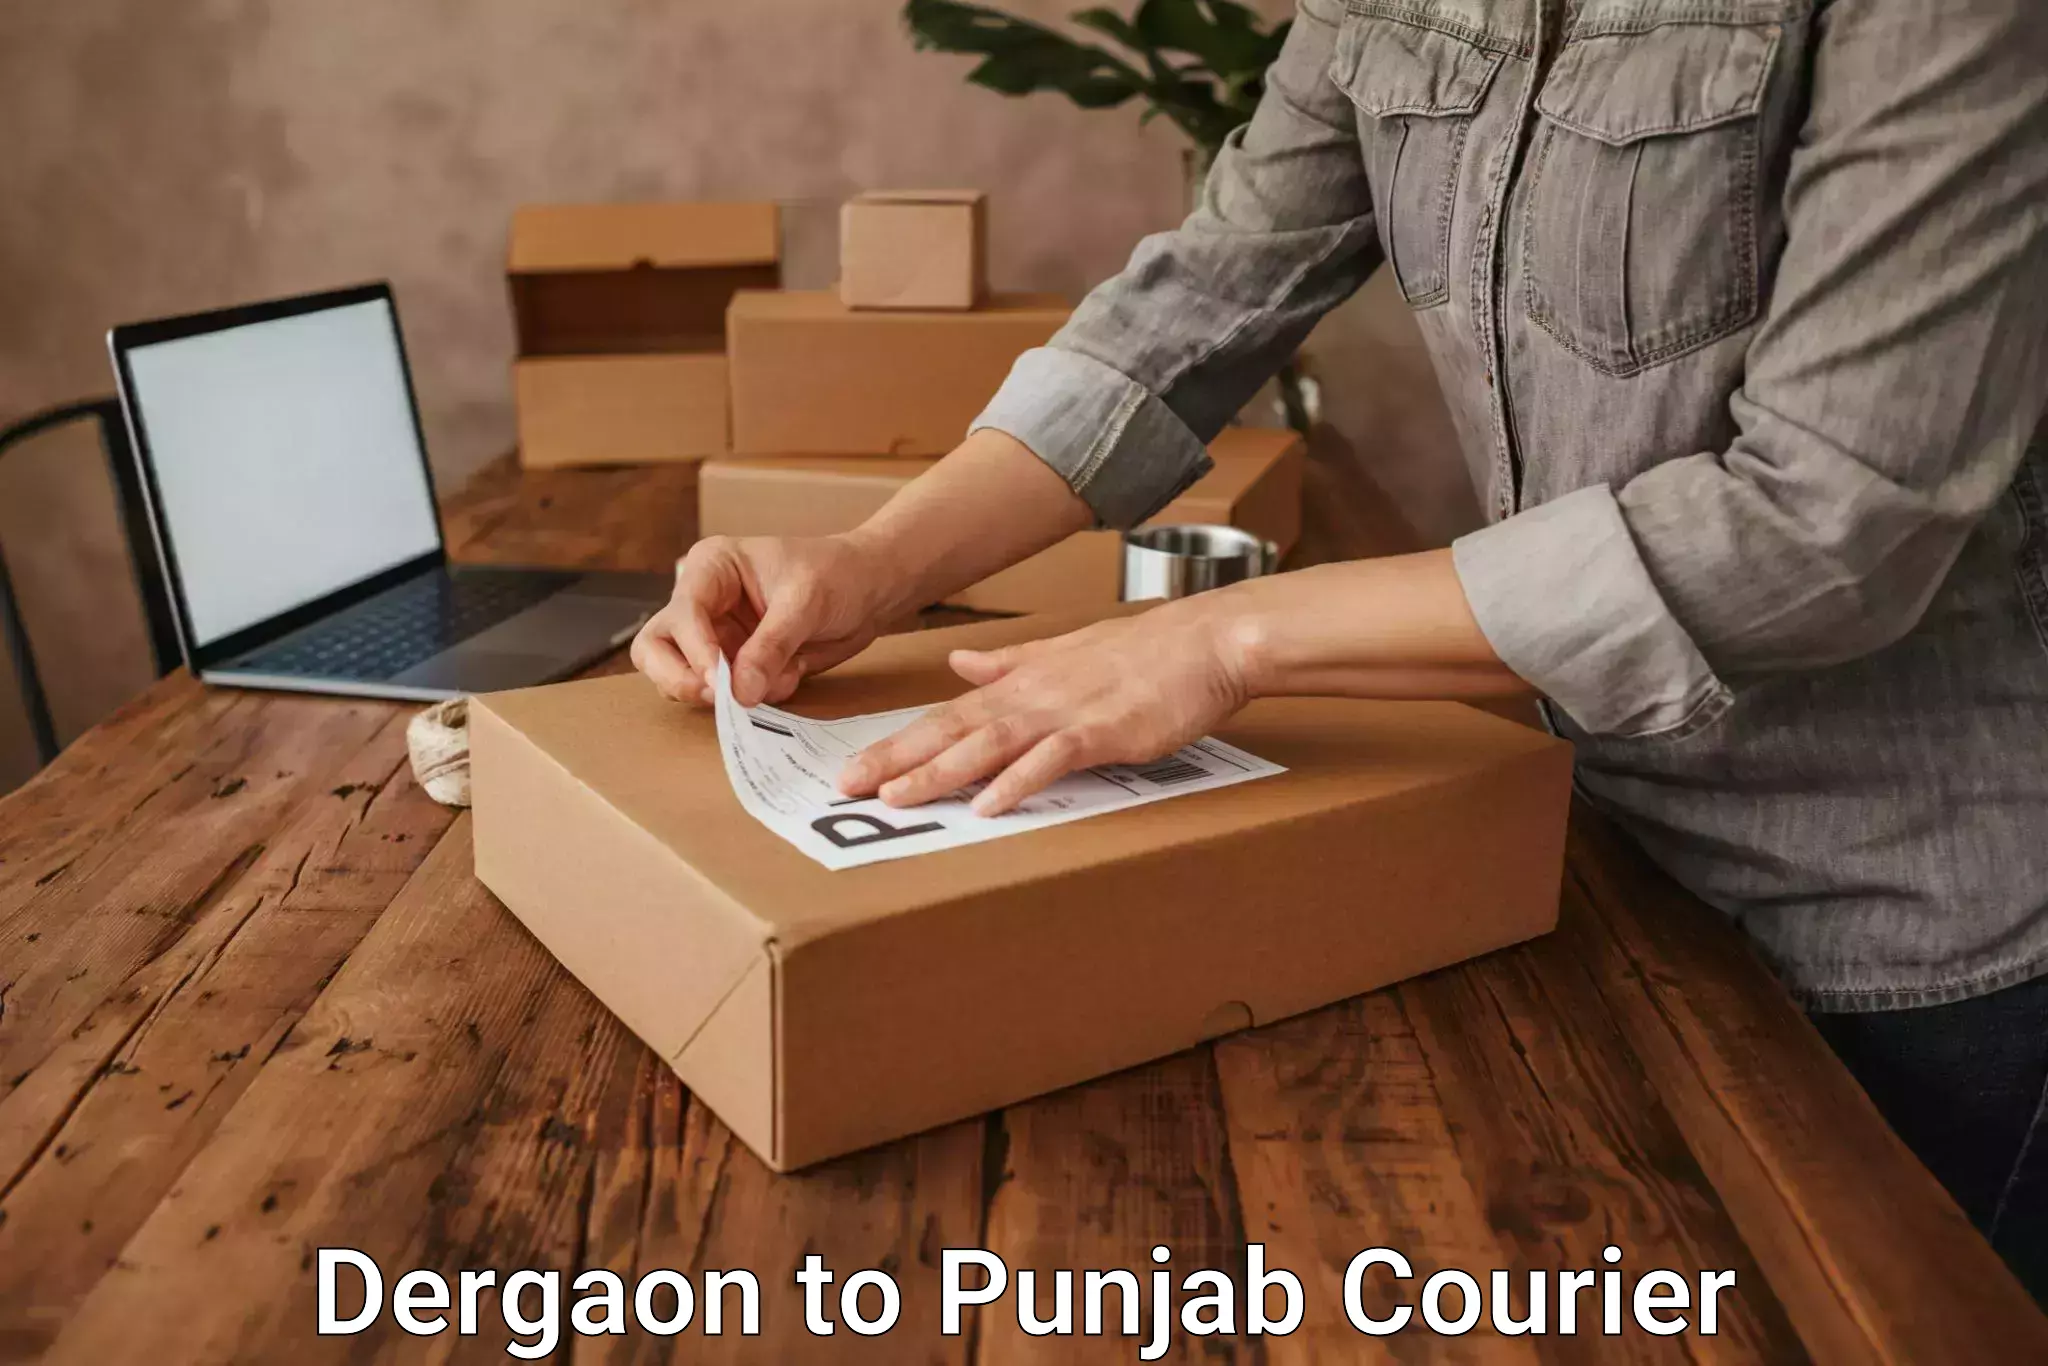 Next-day delivery options Dergaon to Dera Bassi